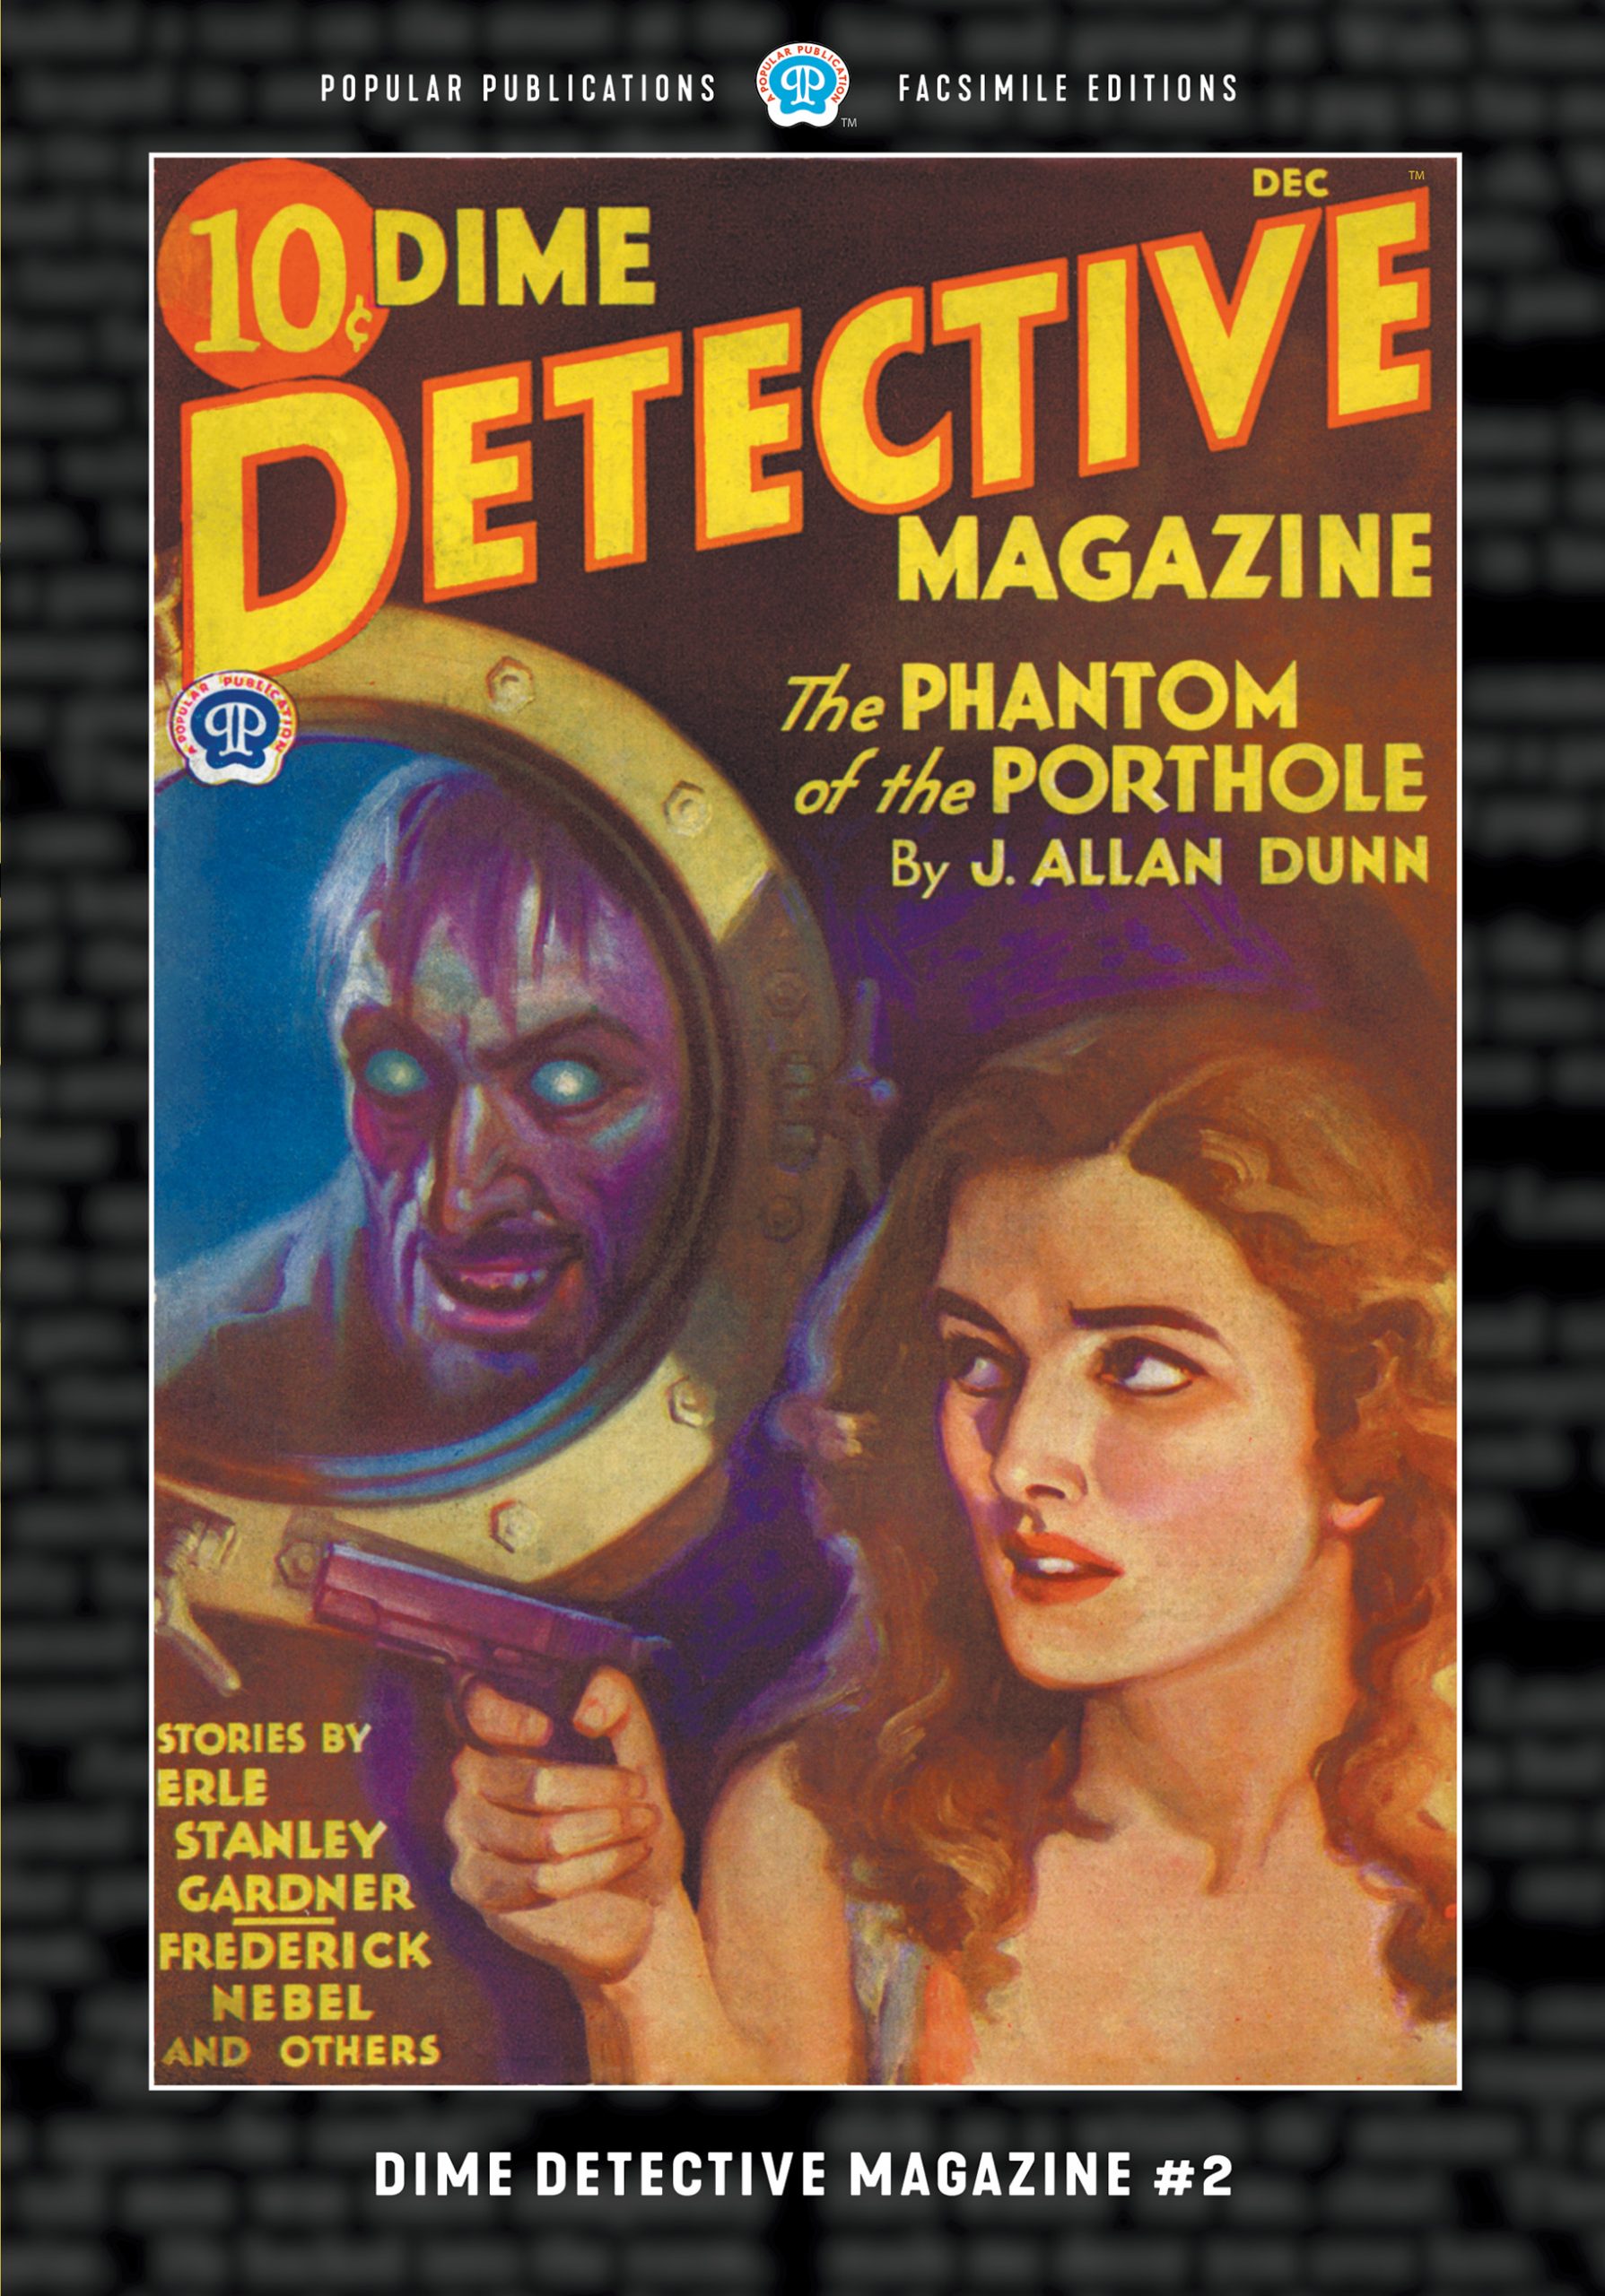 barbara demeulemeester recommends Vintage Detective Magazine Covers